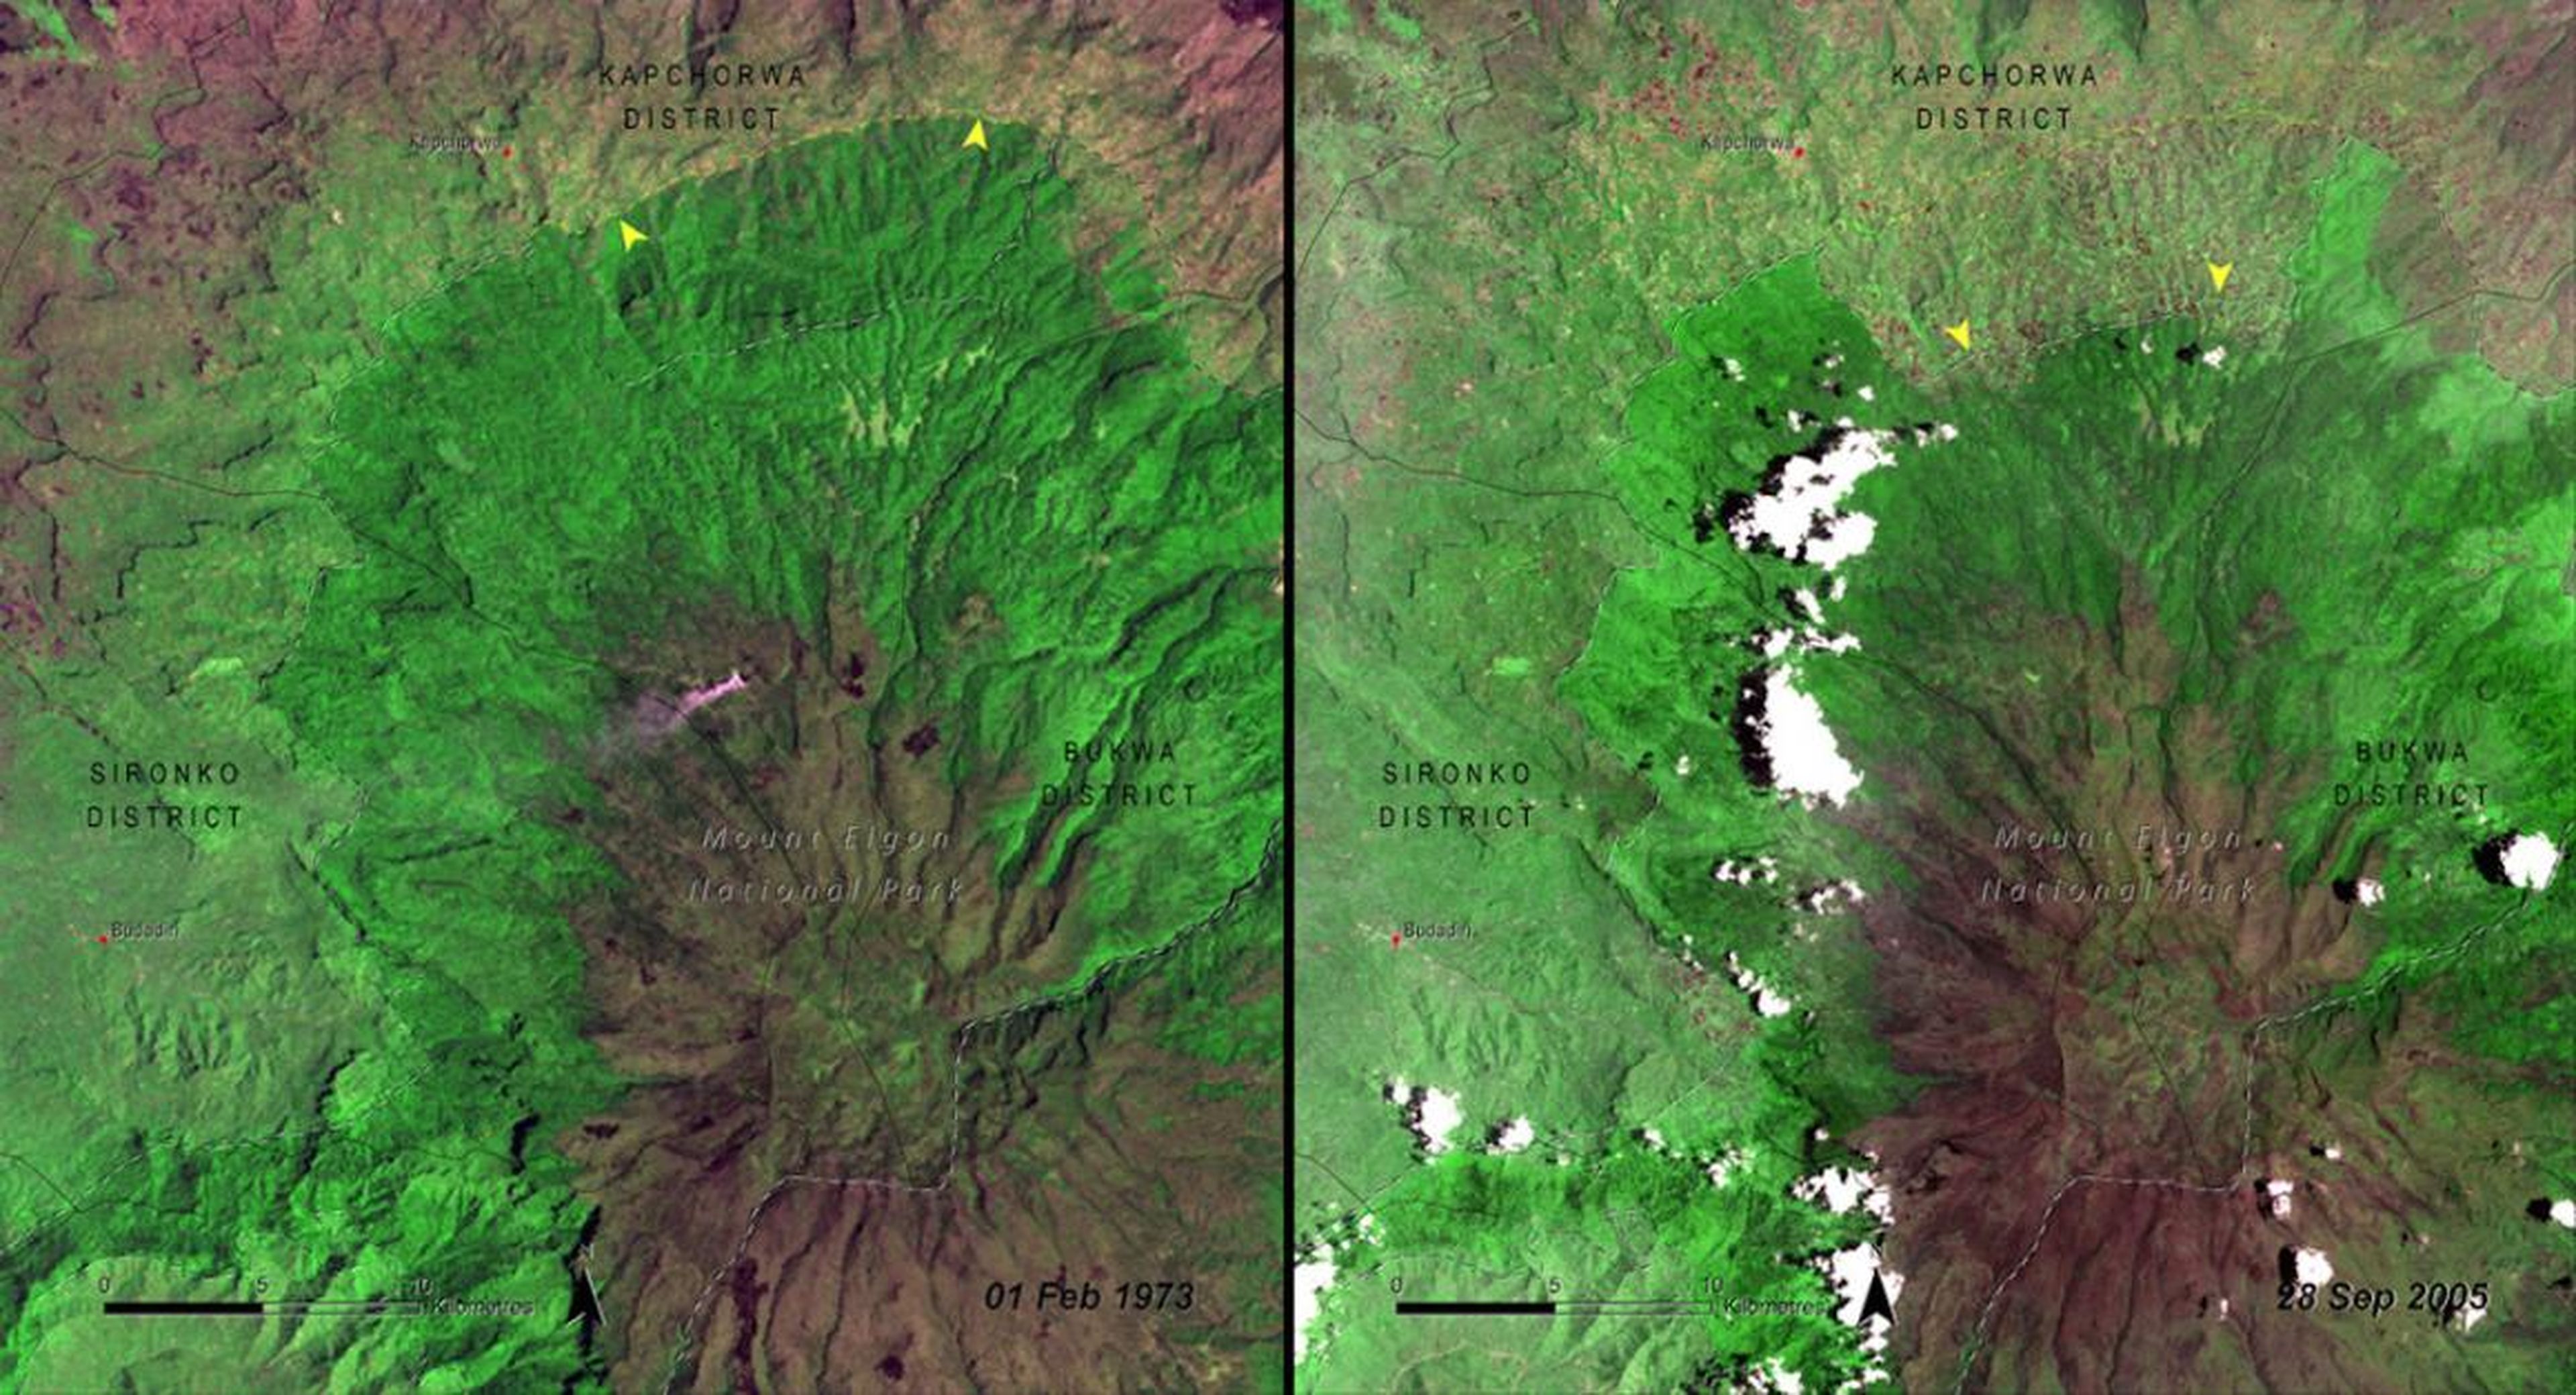 Deforestation, often from logging or to clear room for agriculture, is another highly visible human-driven change. Starting in the 1970s, NASA began using satellite images to document deforestation in national parks around the